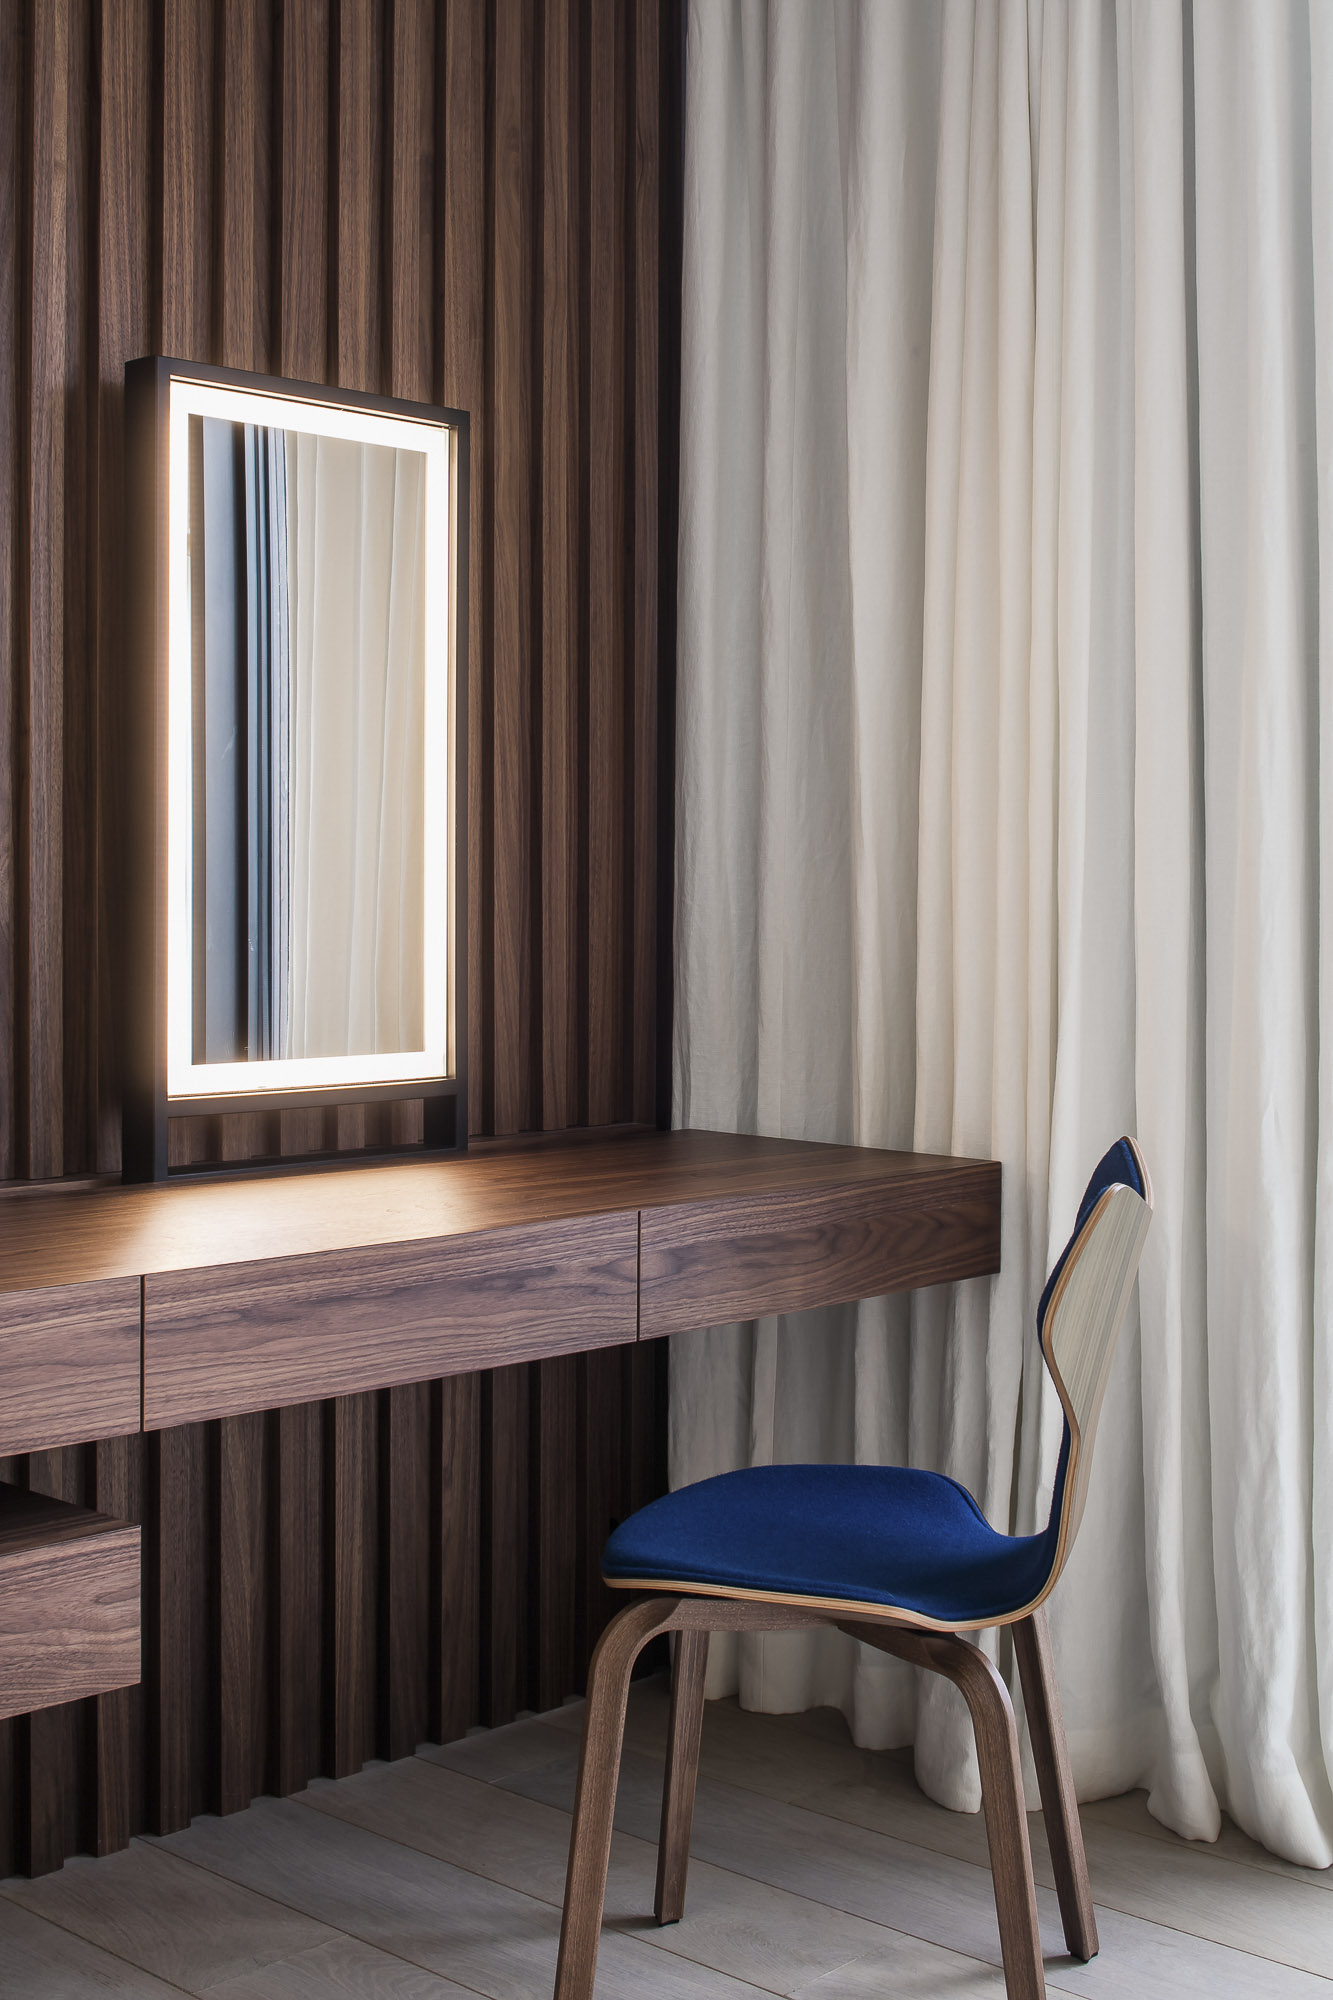 Elegant wooden vanity with an illuminated mirror, paired with a blue-cushioned chair, set against draped white curtains.